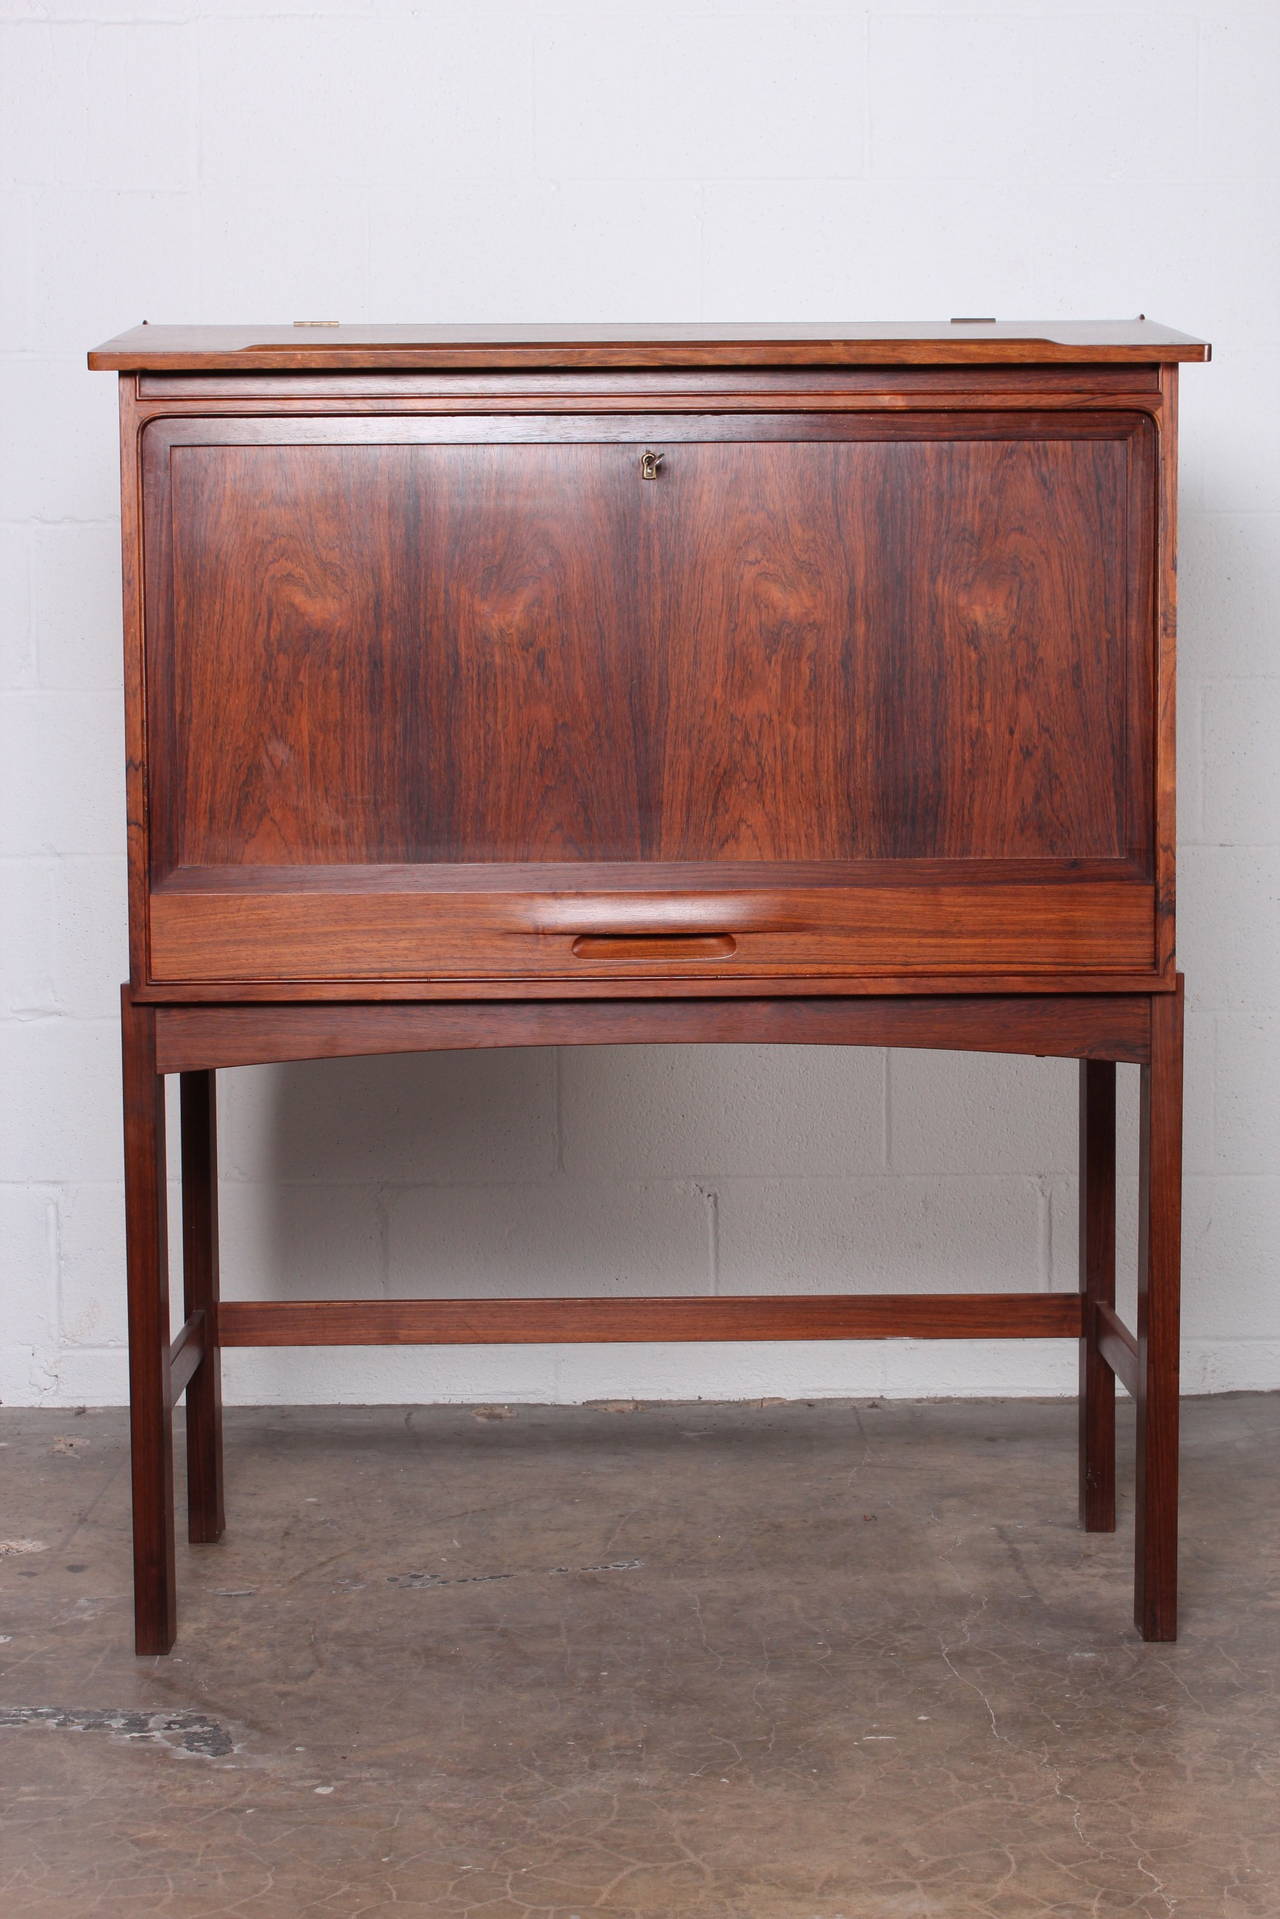 A beautifully crafted Danish rosewood drop front desk. The bottom drawer pulls out to support the desk top when down. Top lifts for storage as well.